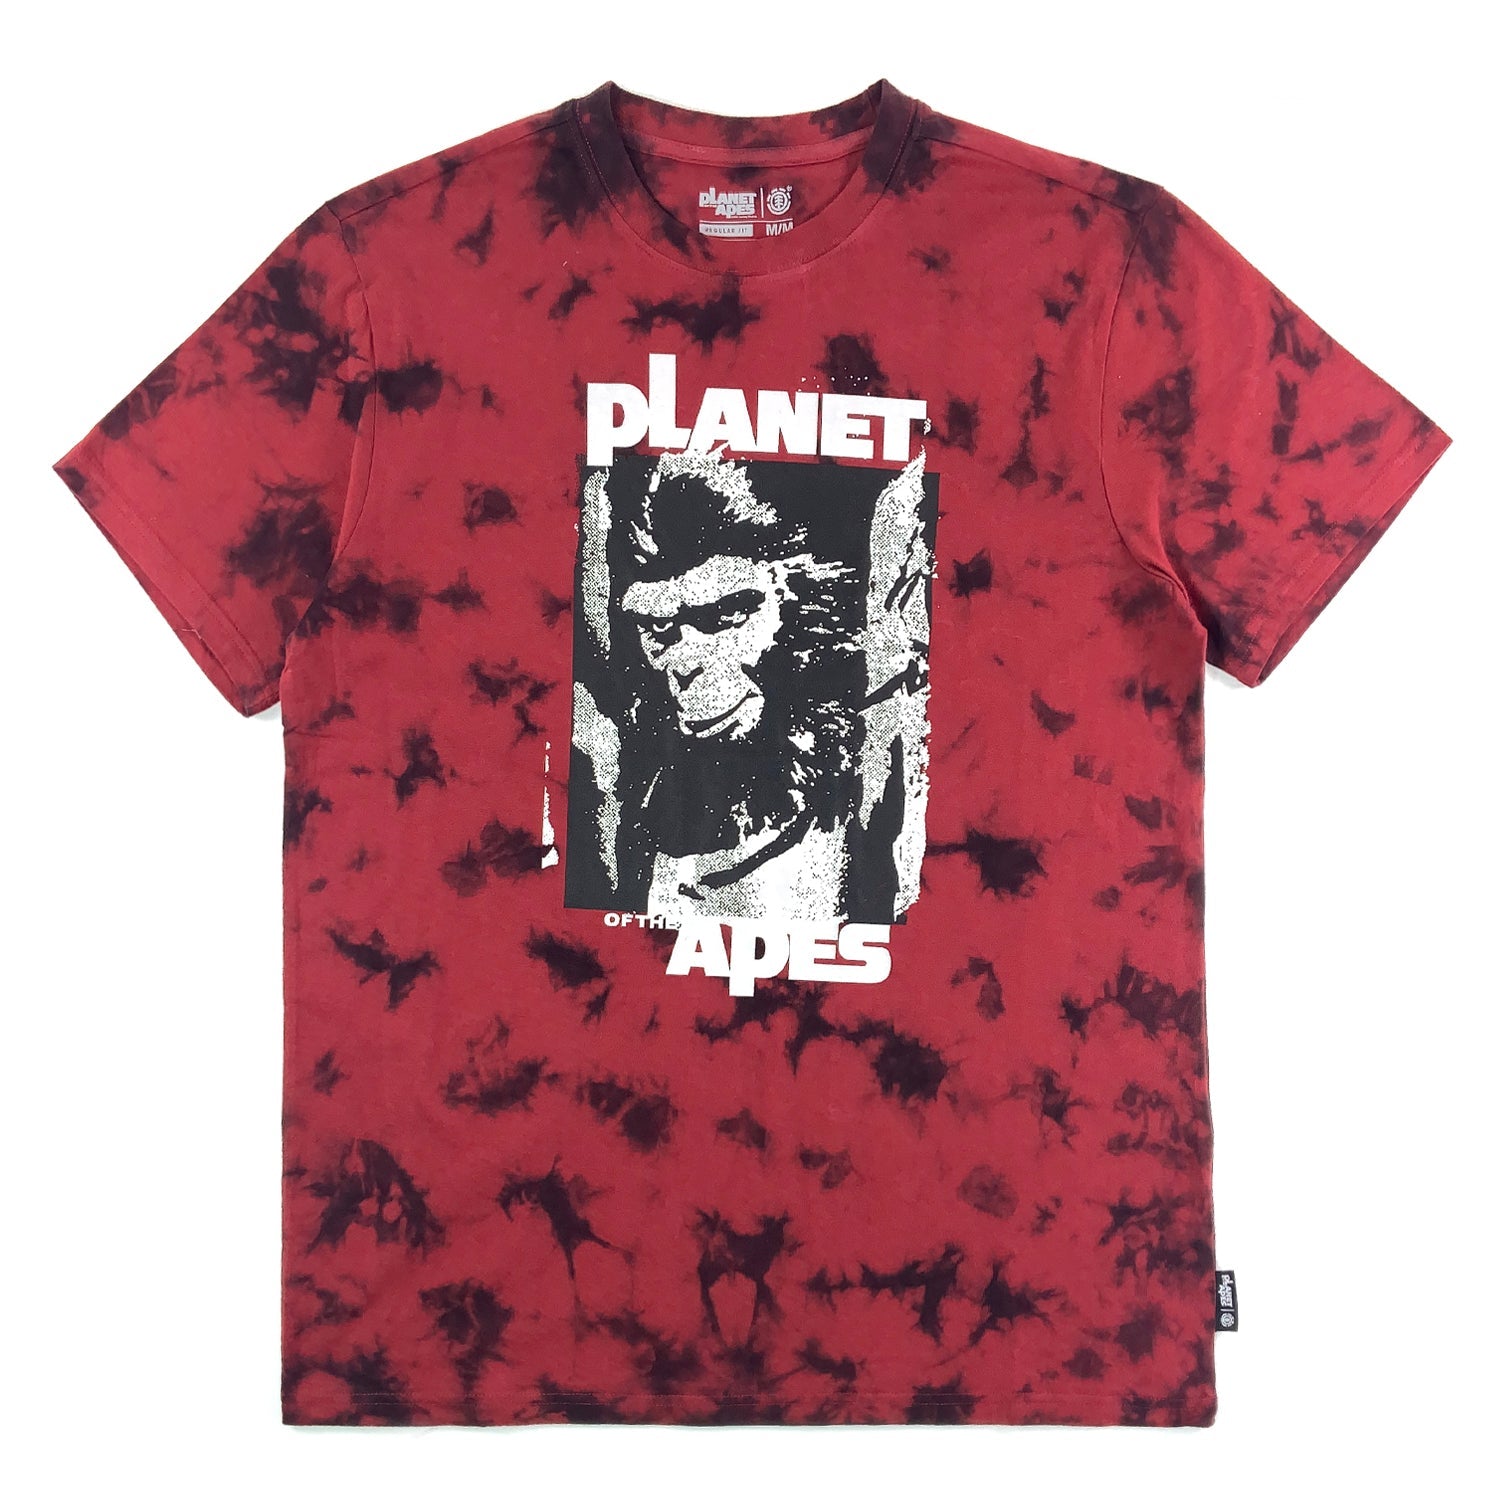 Element x Planet of the Apes - Surge T-shirt - Red/Black - Prime Delux Store